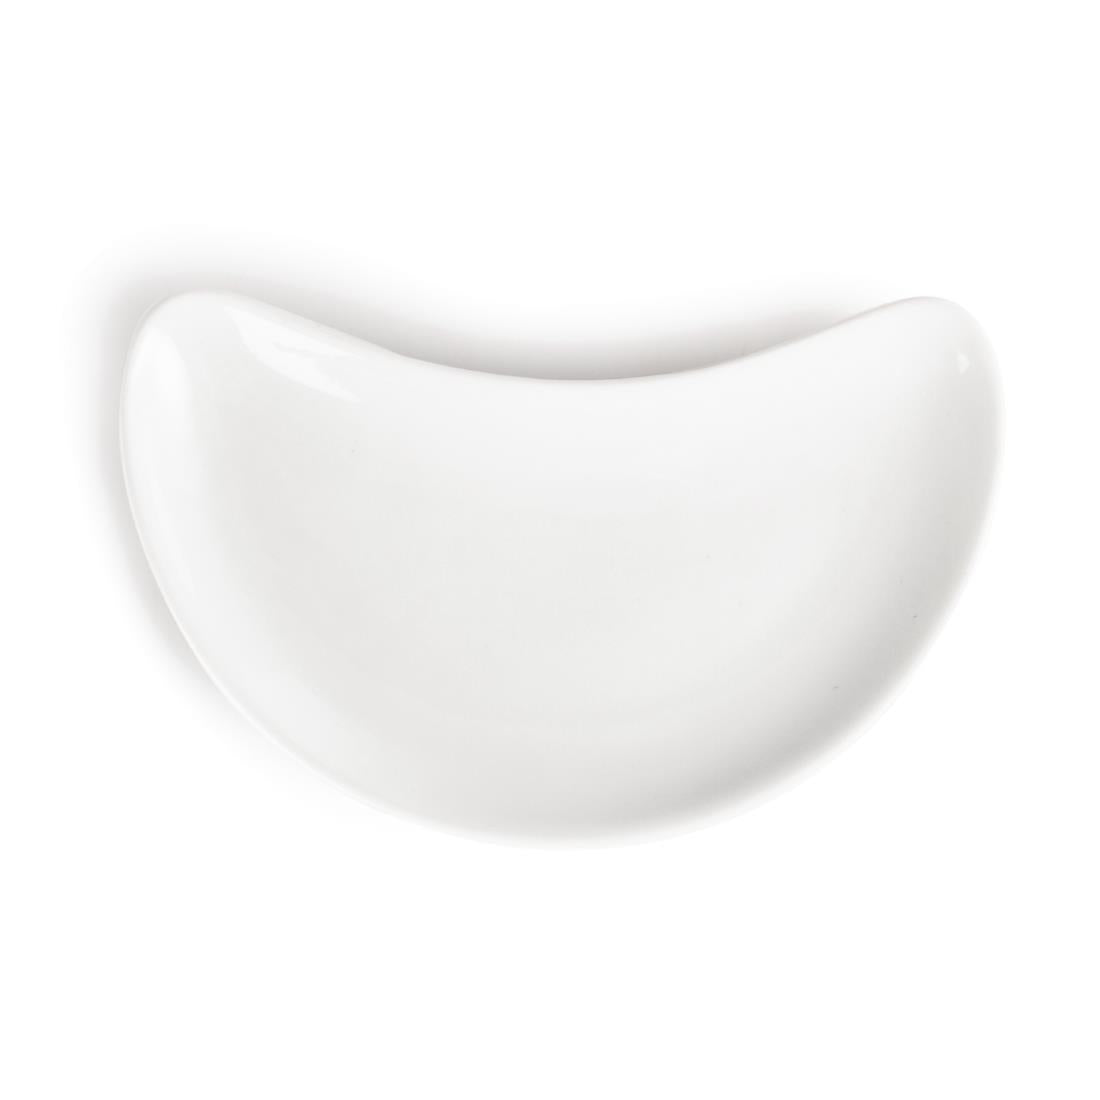 C231 Olympia Whiteware Crescent Salad Plates 200mm (Pack of 12)